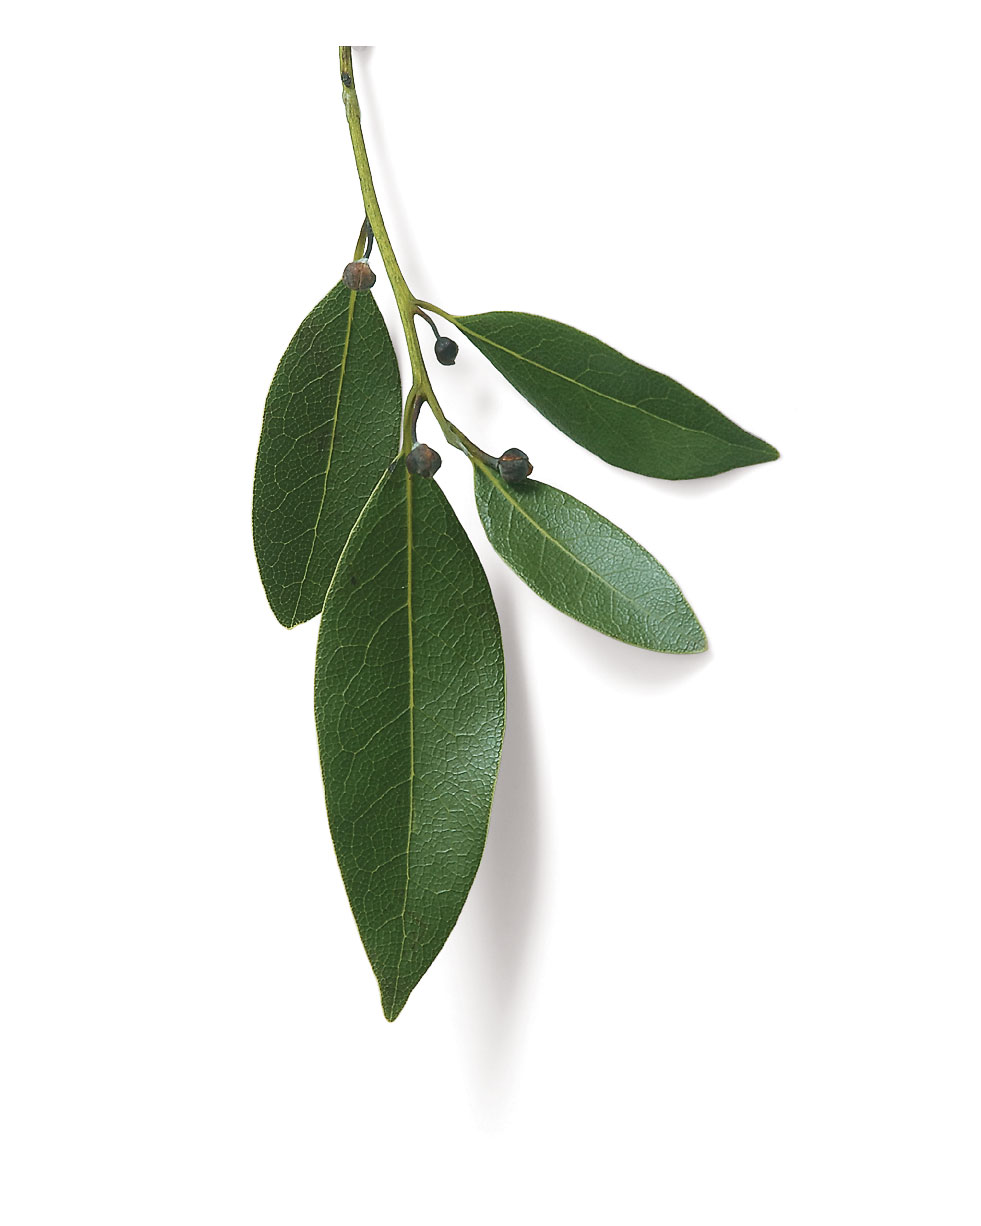 What are bay leaves?